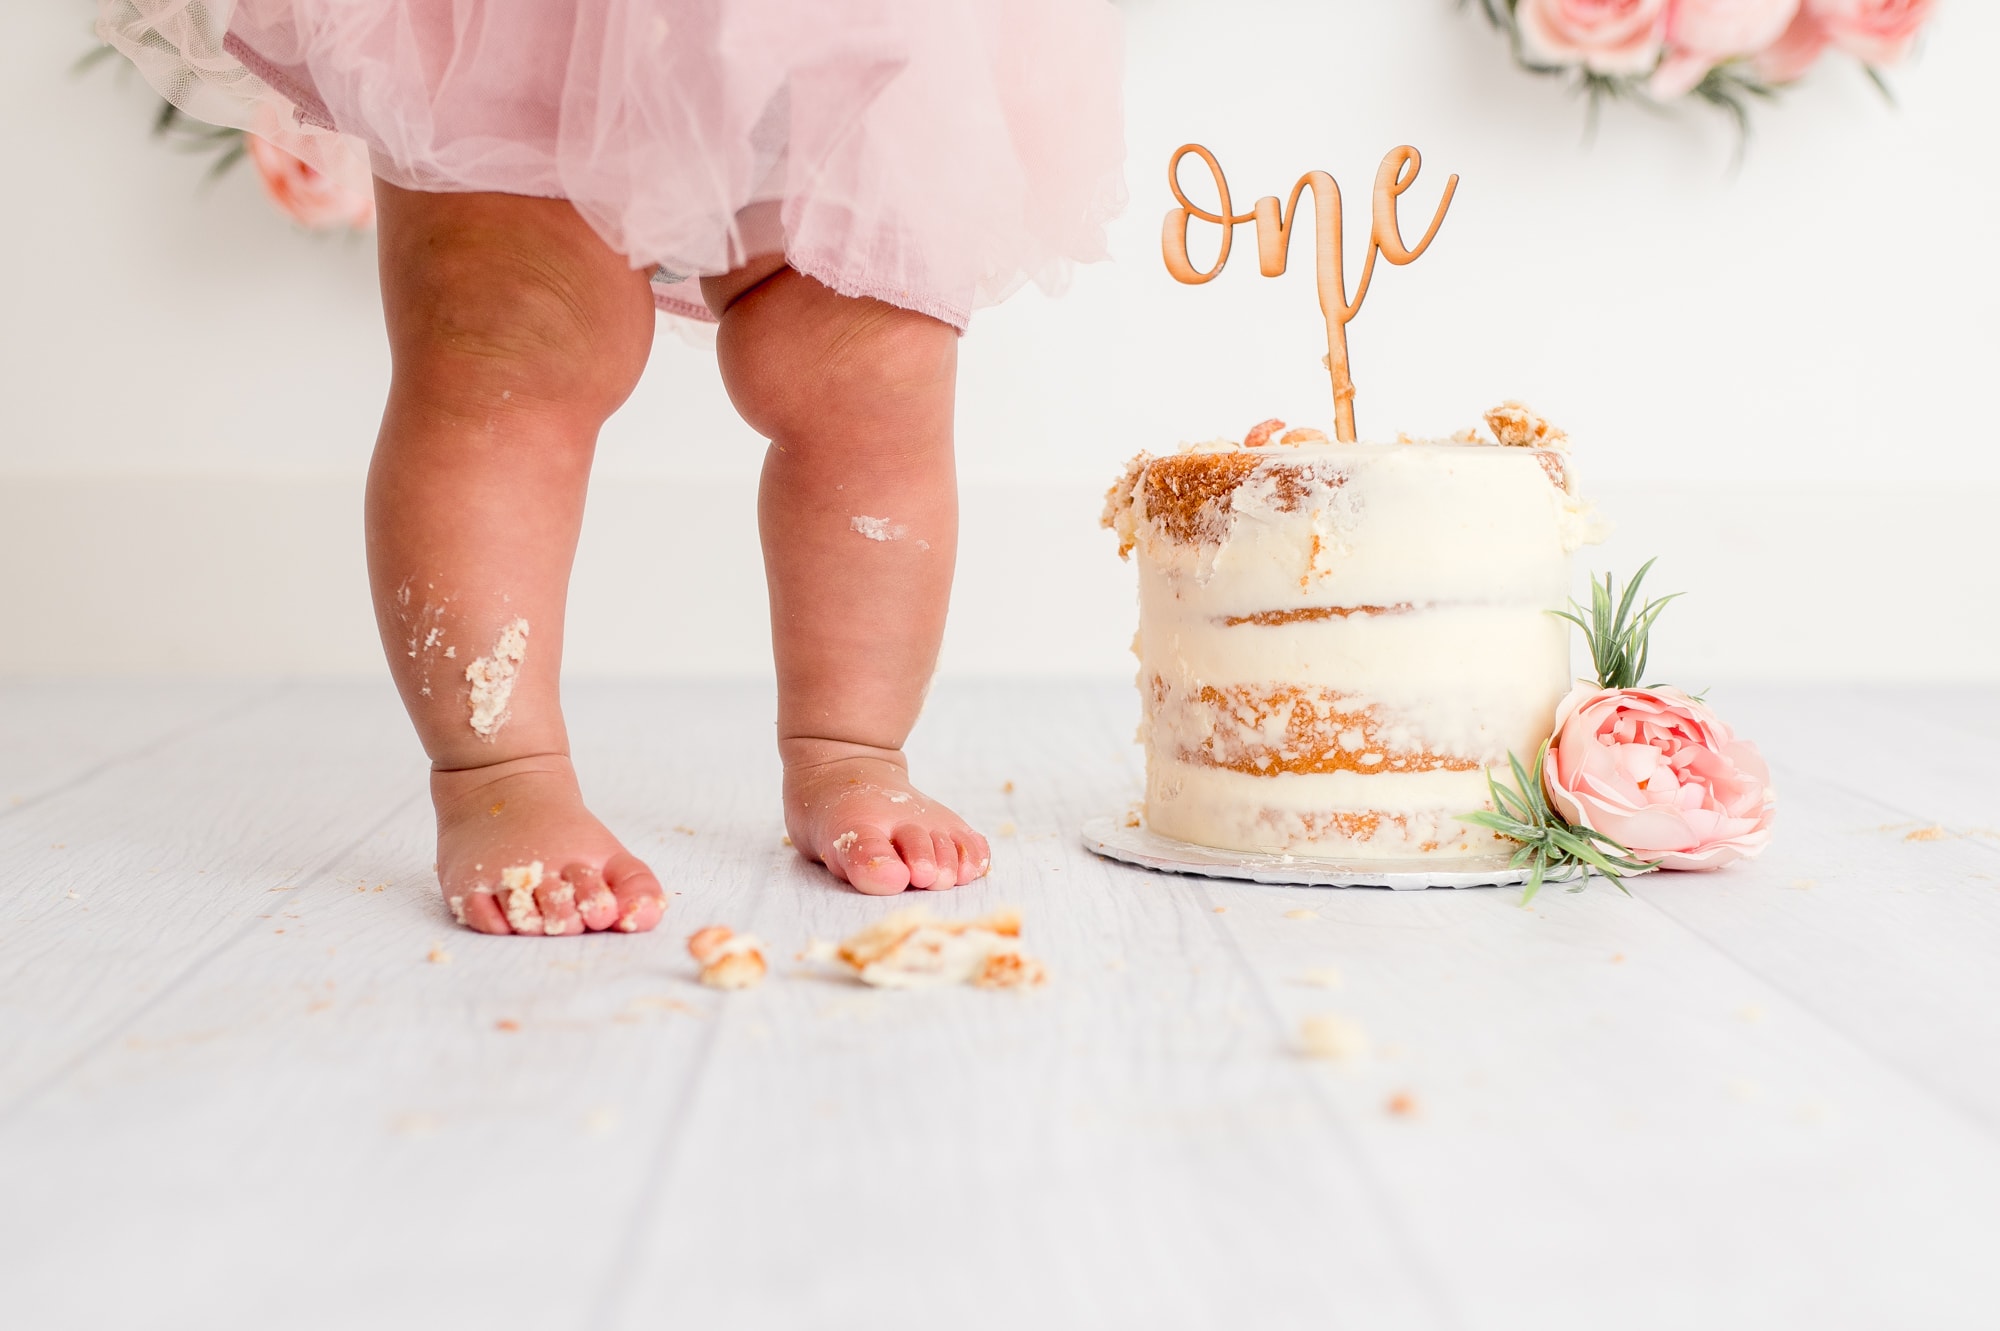 Chubby legs of girl next to a cake that has been smashed and has a cake topper saying "one".